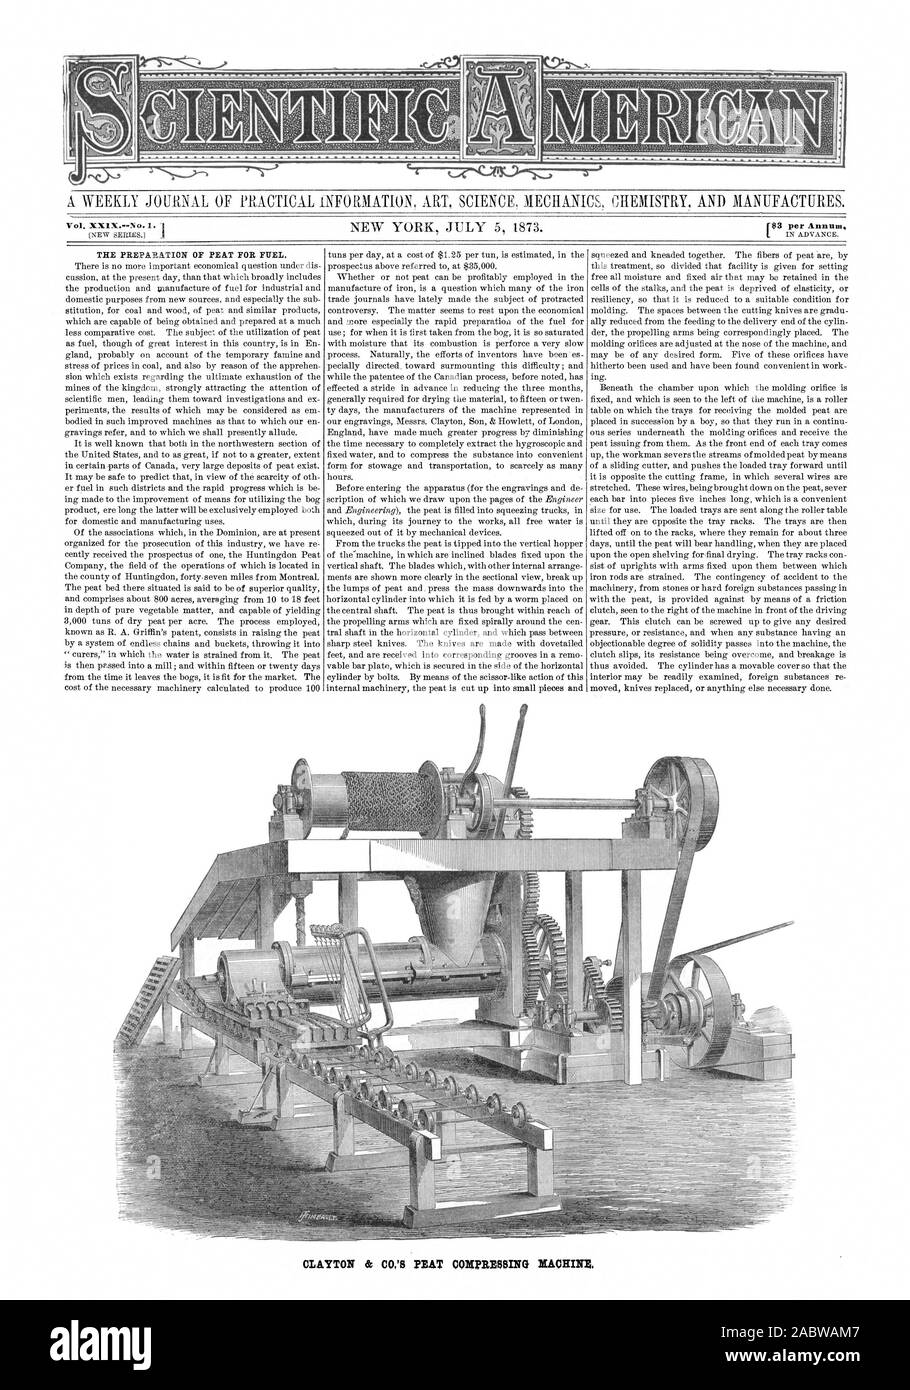 A WEEKLY JOURNAL OF PRACTICAL INFORMATION ART SCIENCE MECHANICS CHEMISTRY AND MANUFACTURES. Vol. XX1X.--No.1. 1433 per Annum THE PREPARATION OF PEAT FOR FUEL. CLAYTON & CO.'S PEAT COMPRESSING MACHINE, scientific american, 1873-07-05 Stock Photo